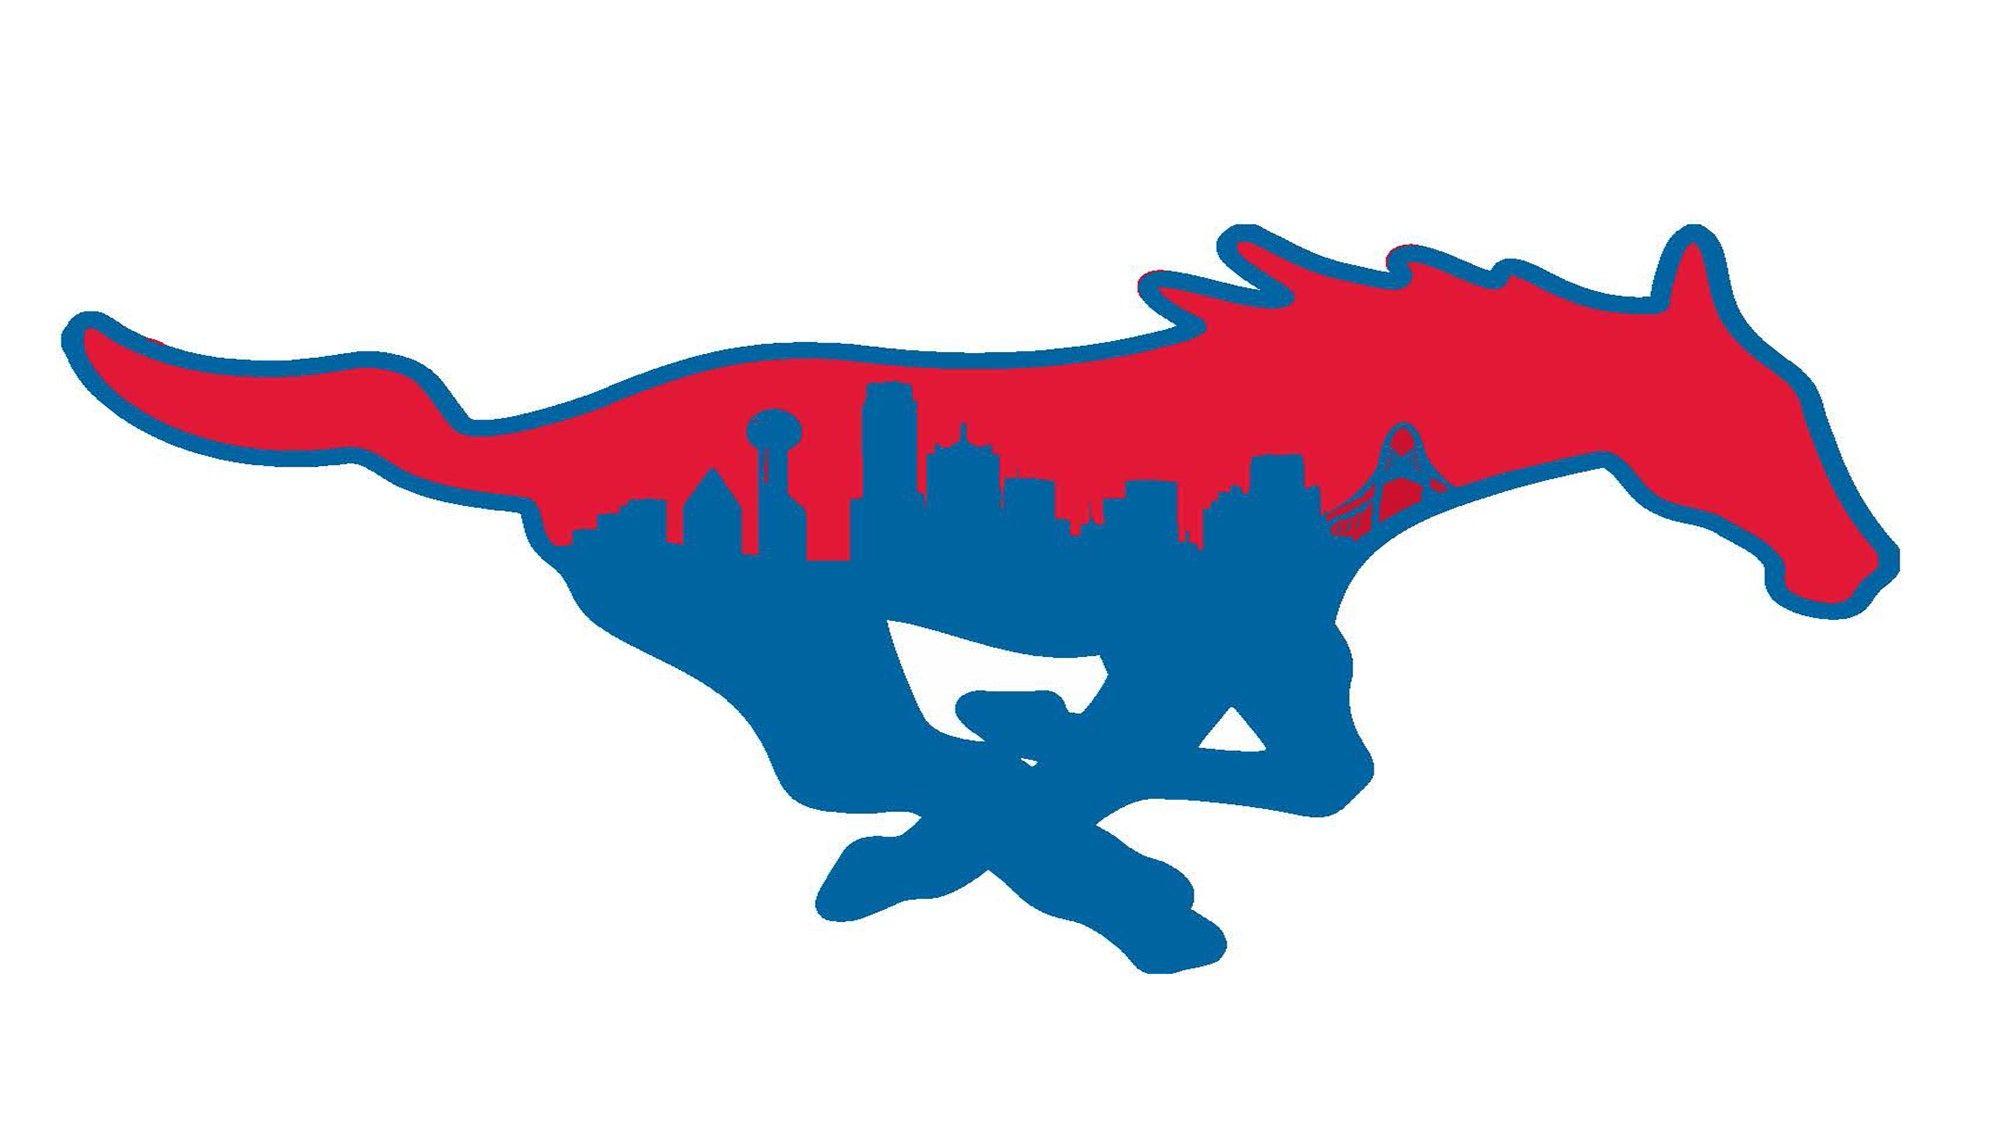 SMU Logo - College Sports: Check out the special Dallas skyline helmet decal ...